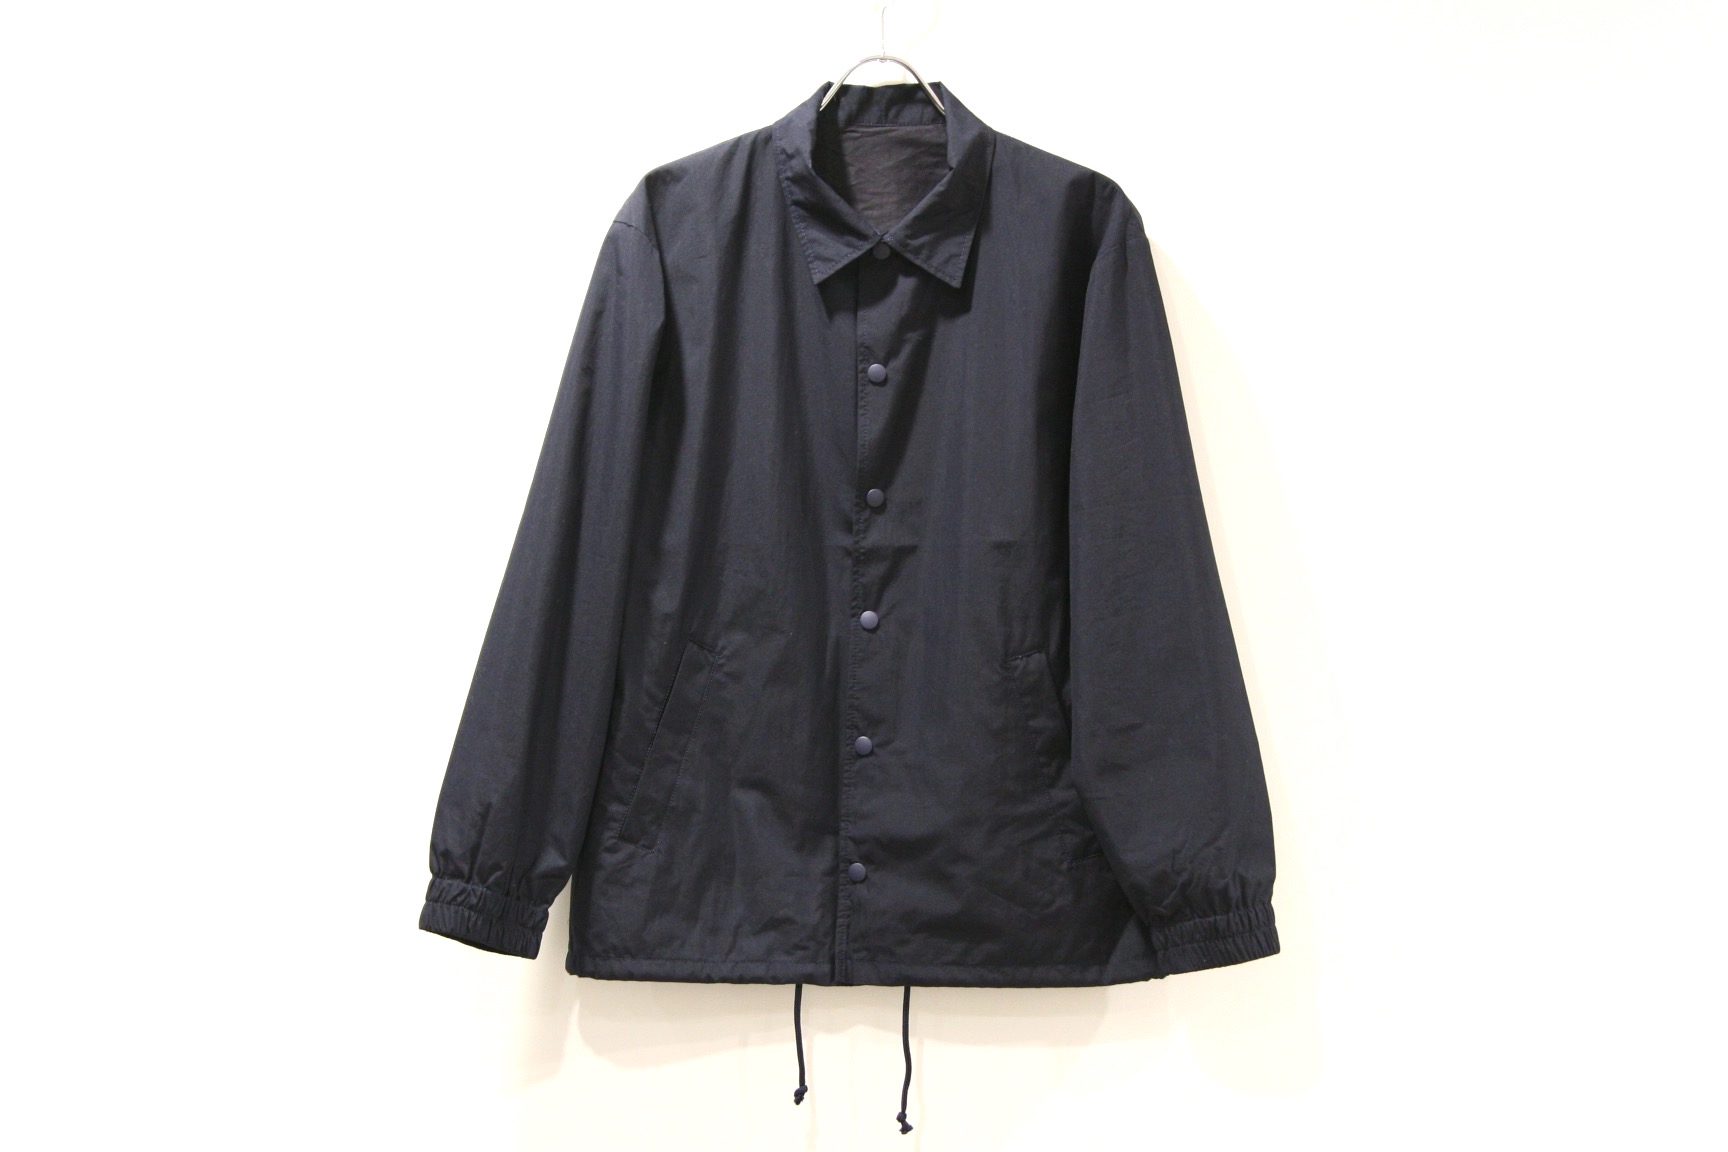 THEE / Coach Jacket 入荷しました。 | ATTEMPT